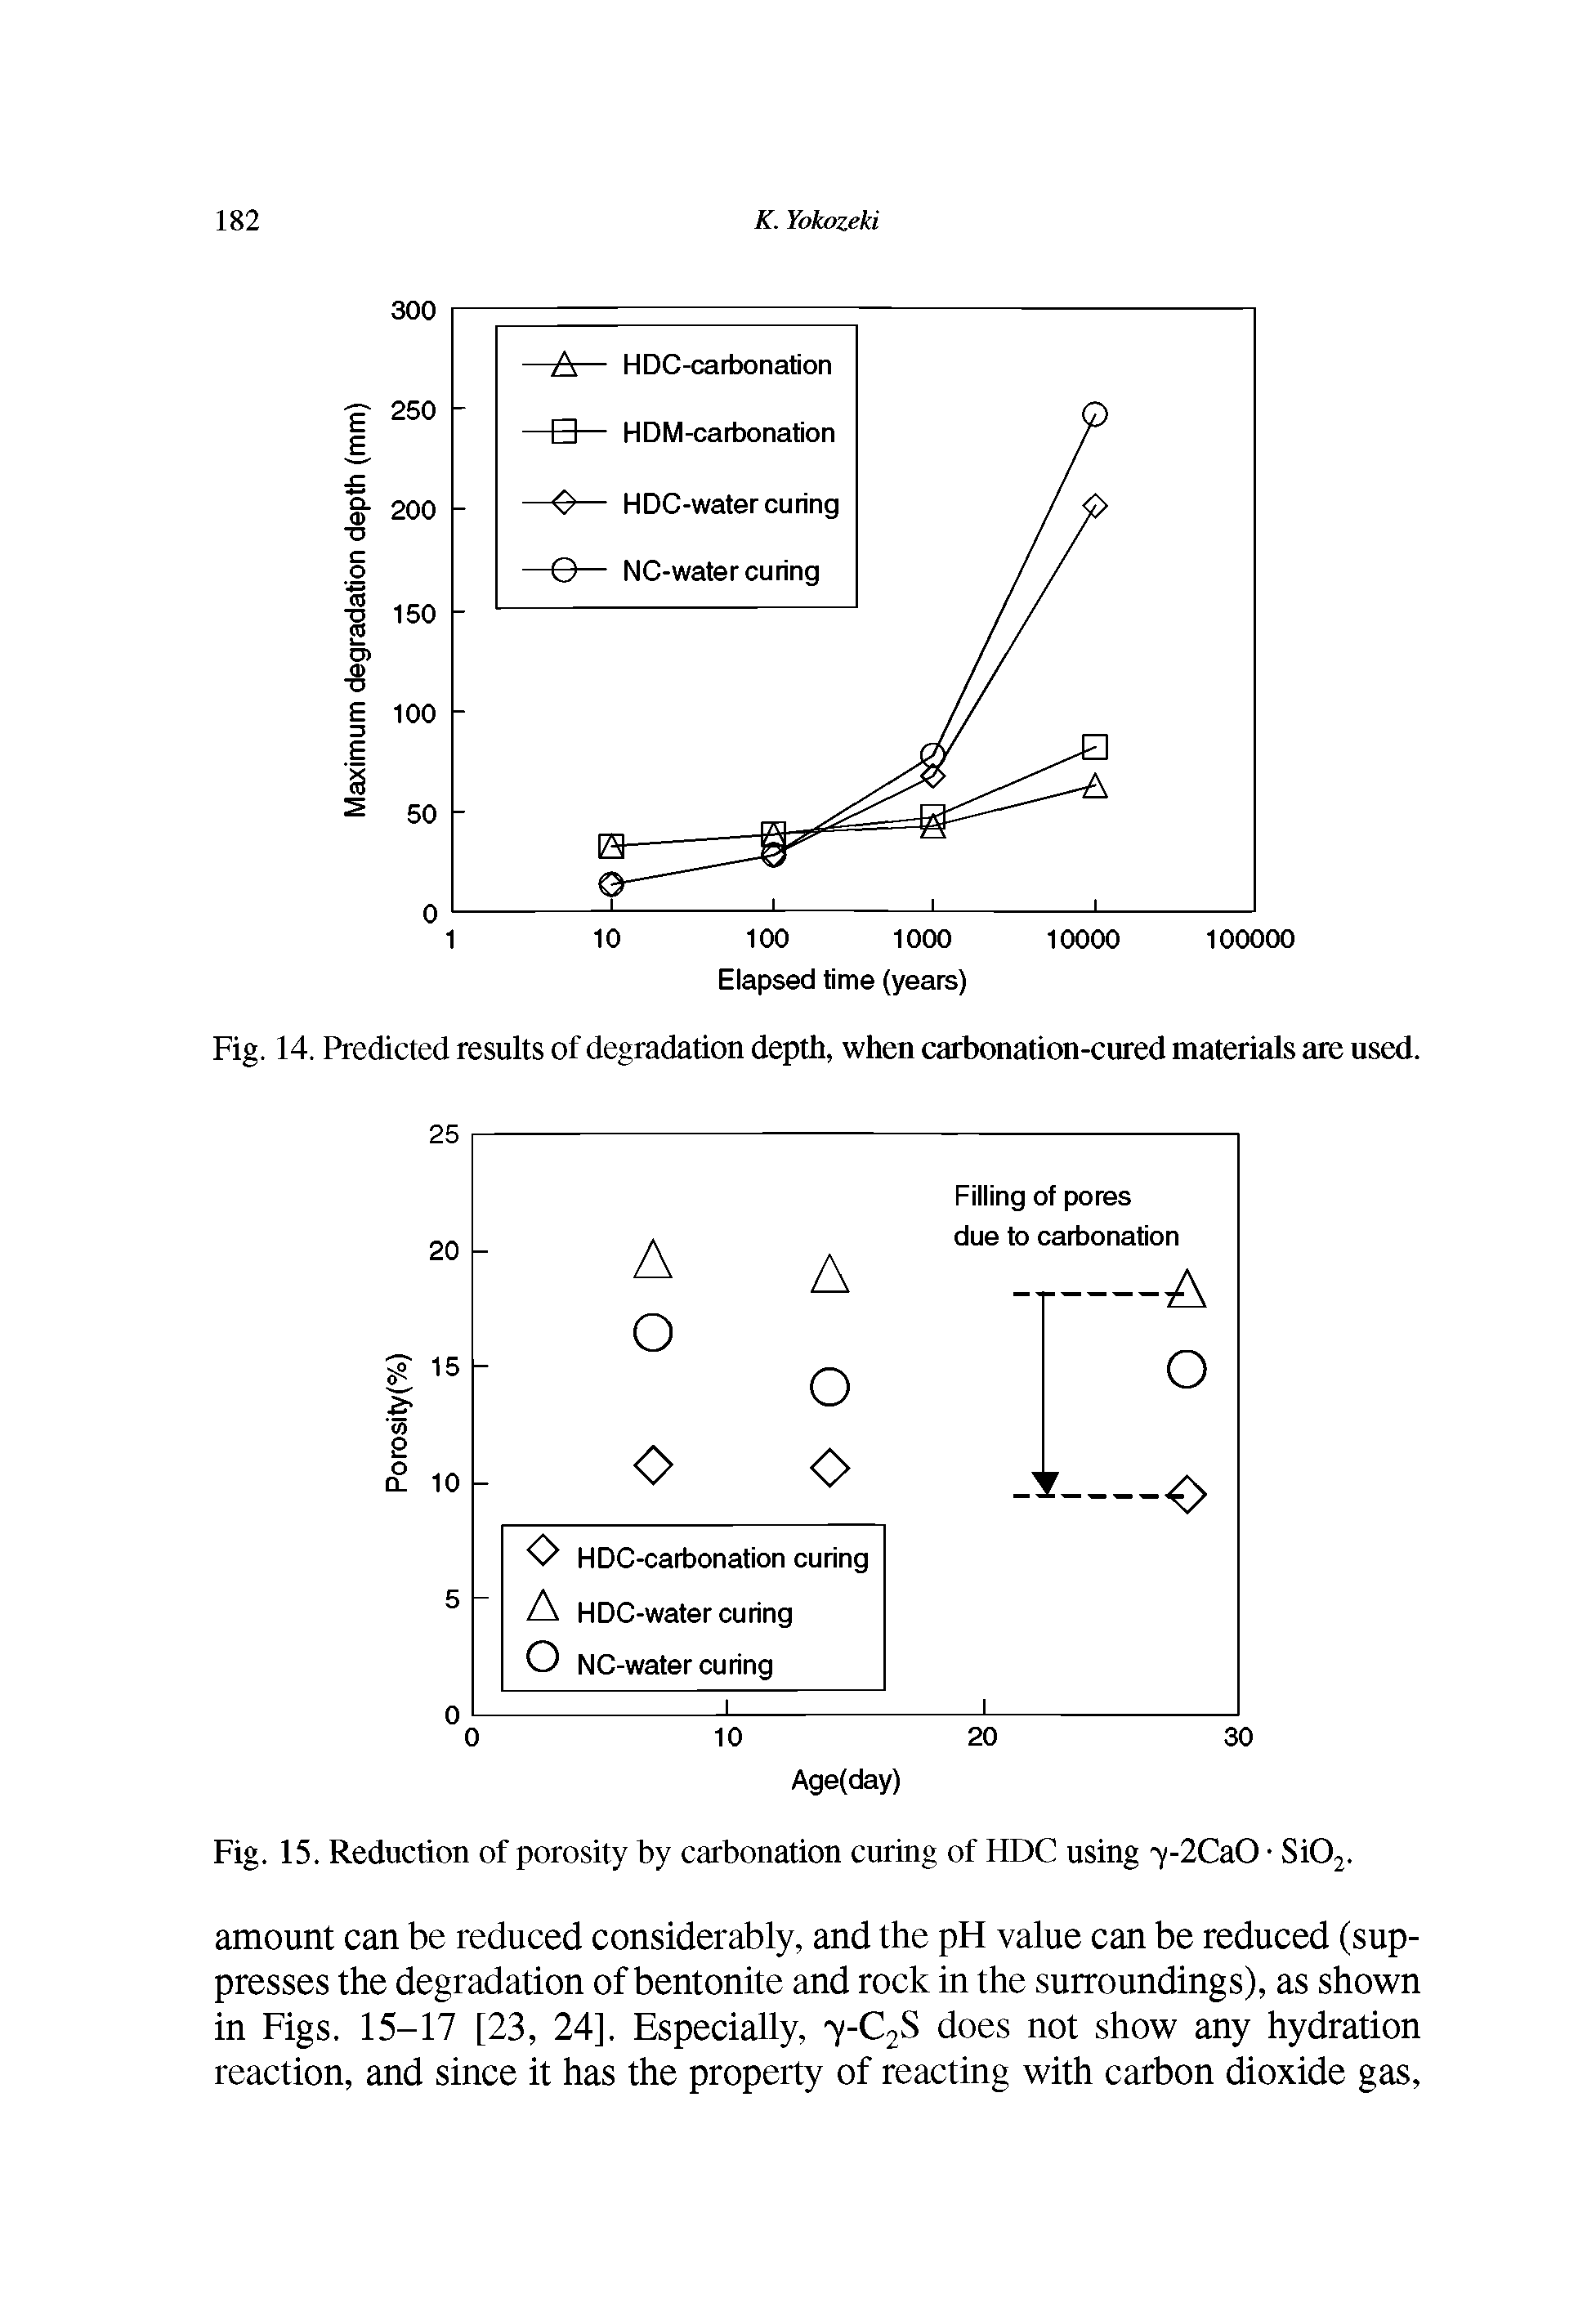 Fig. 15. Reduction of porosity by carbonation curing of HDC using "y-2CaO Si02.